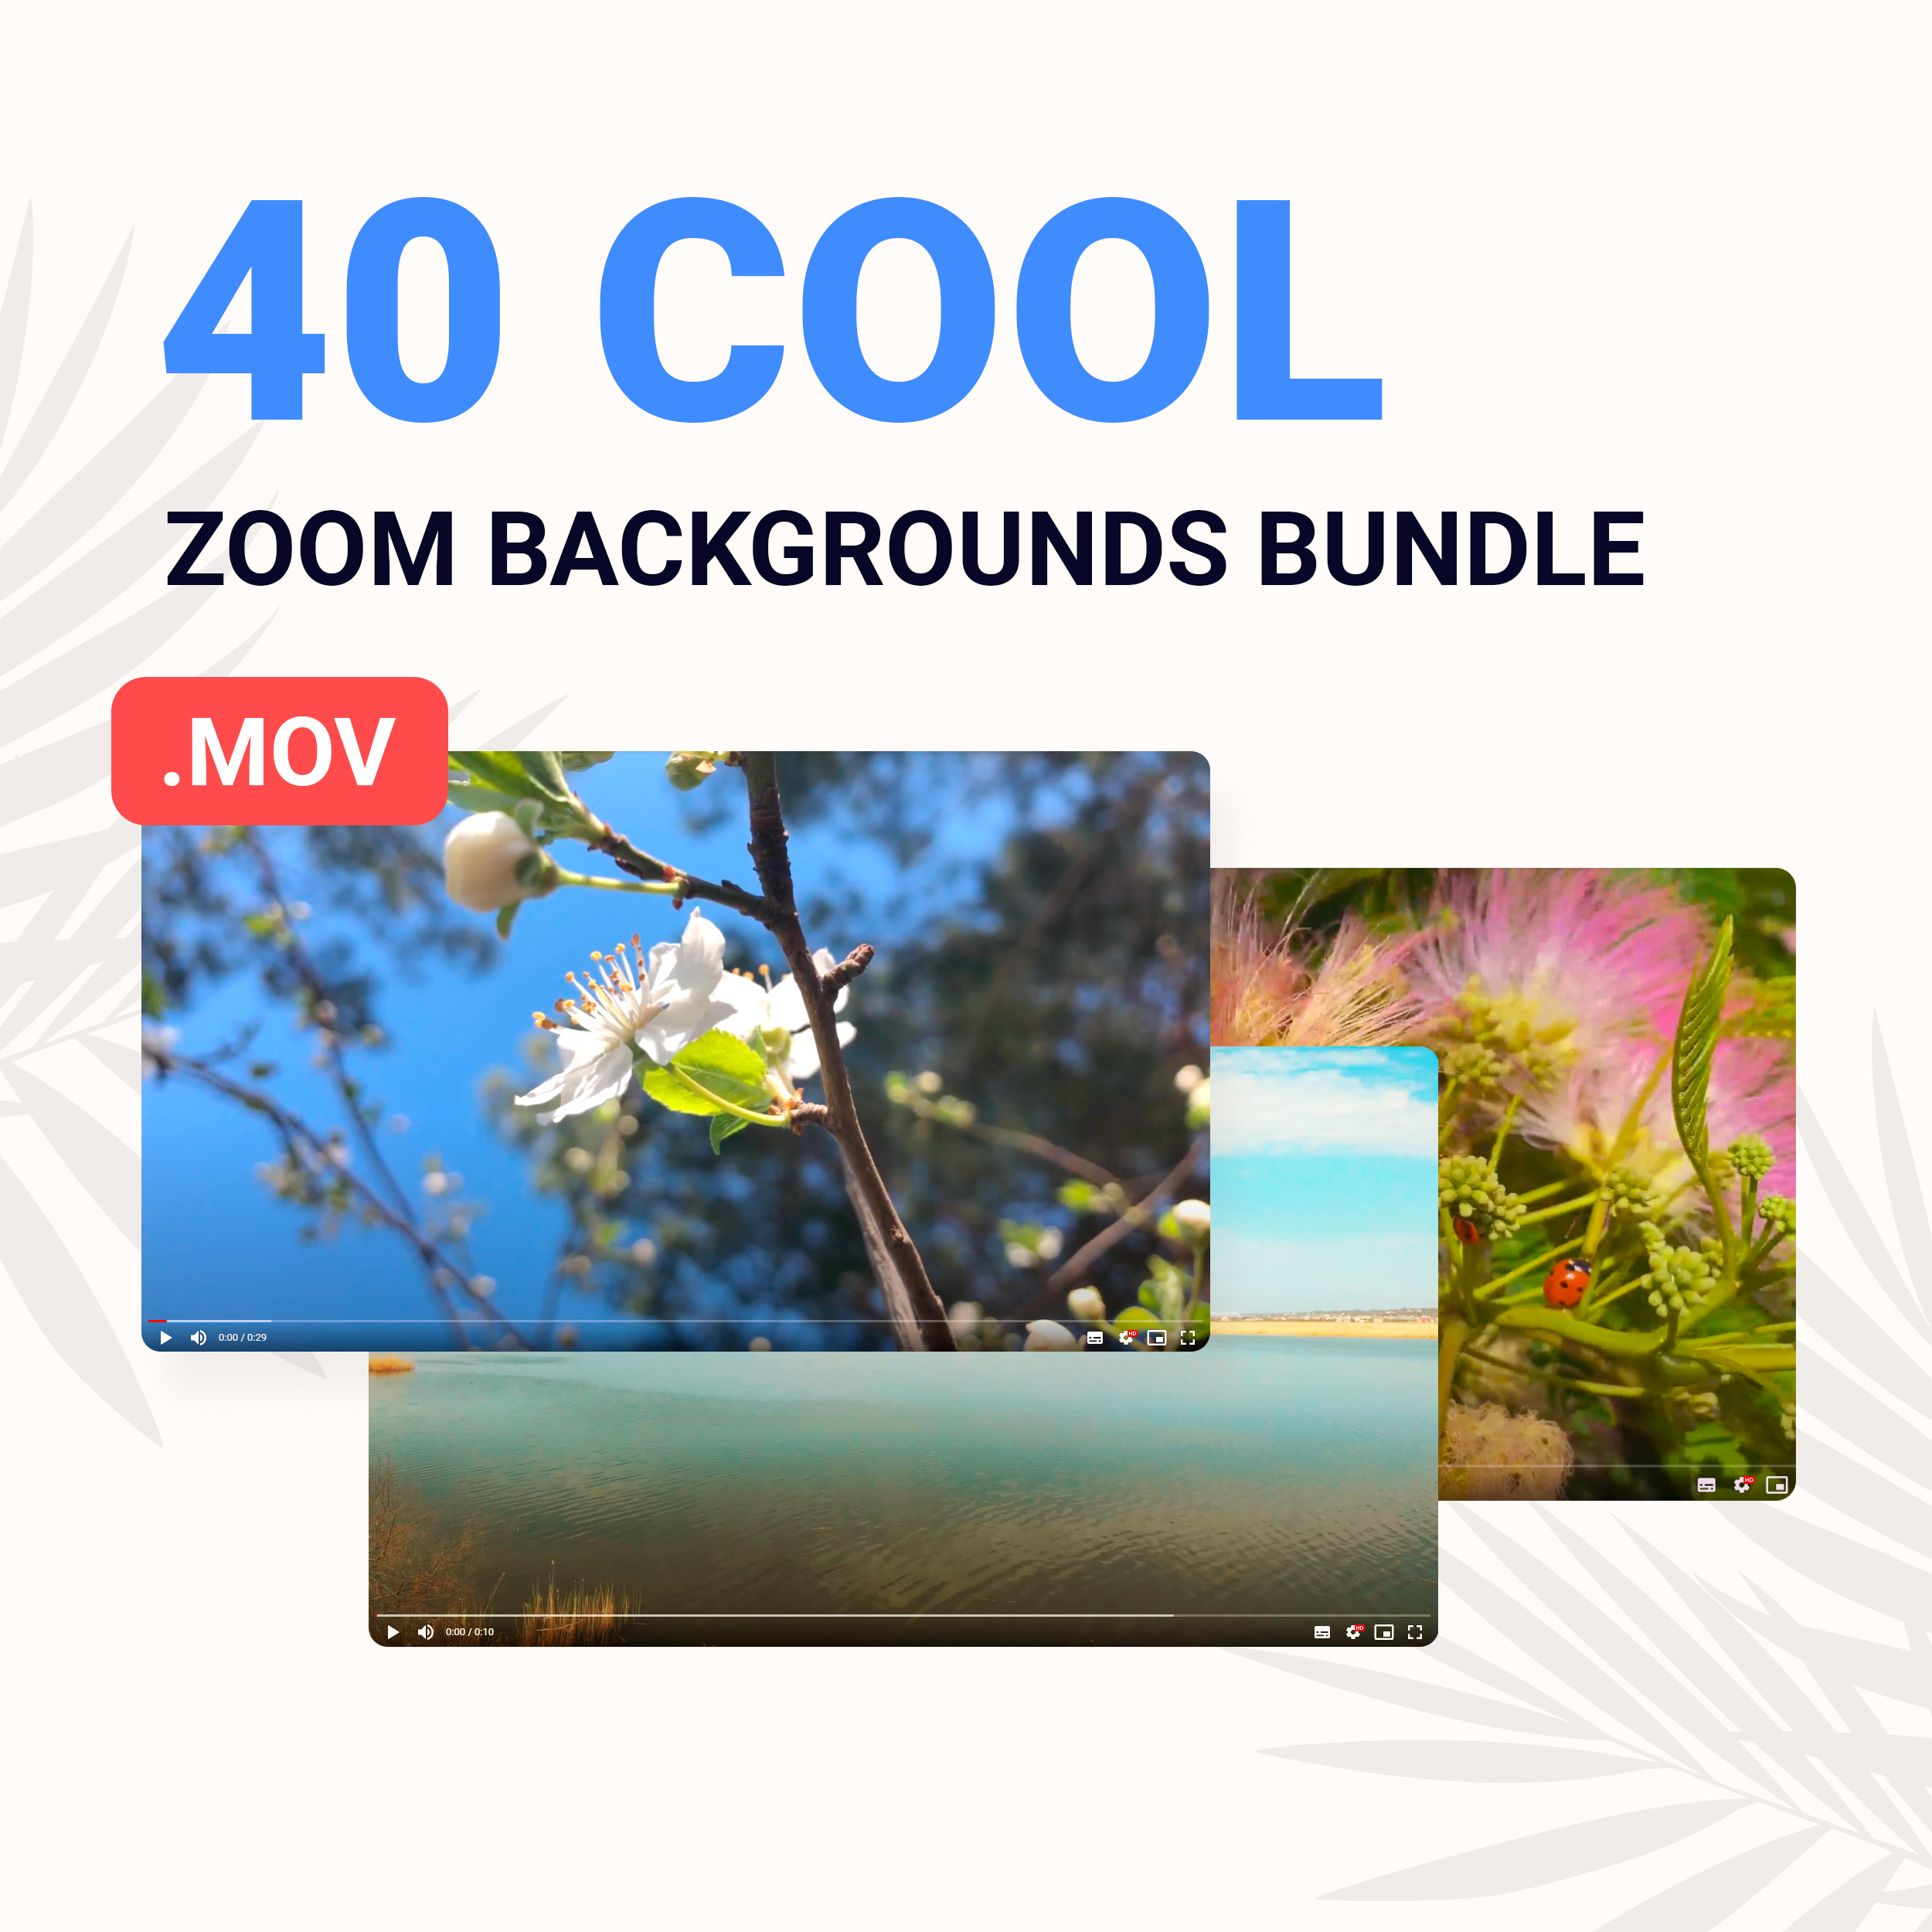 40 Cool Zoom Backgrounds Bundle preview.